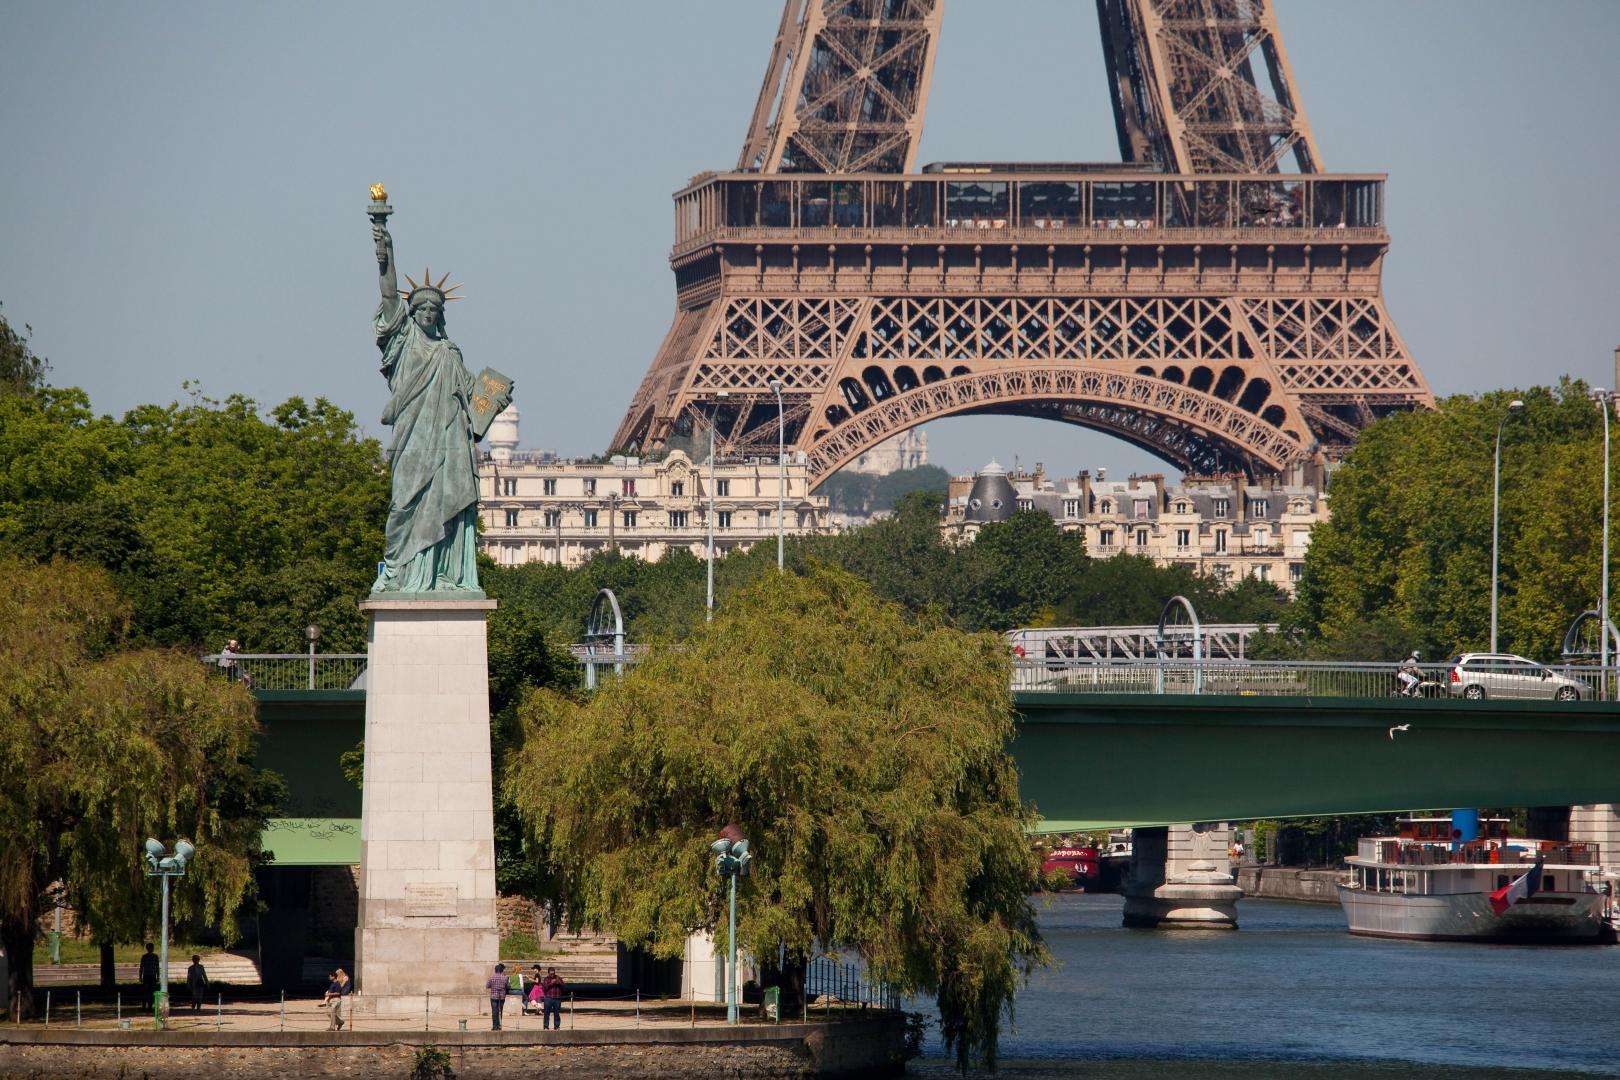 The Statue of Liberty… in Paris